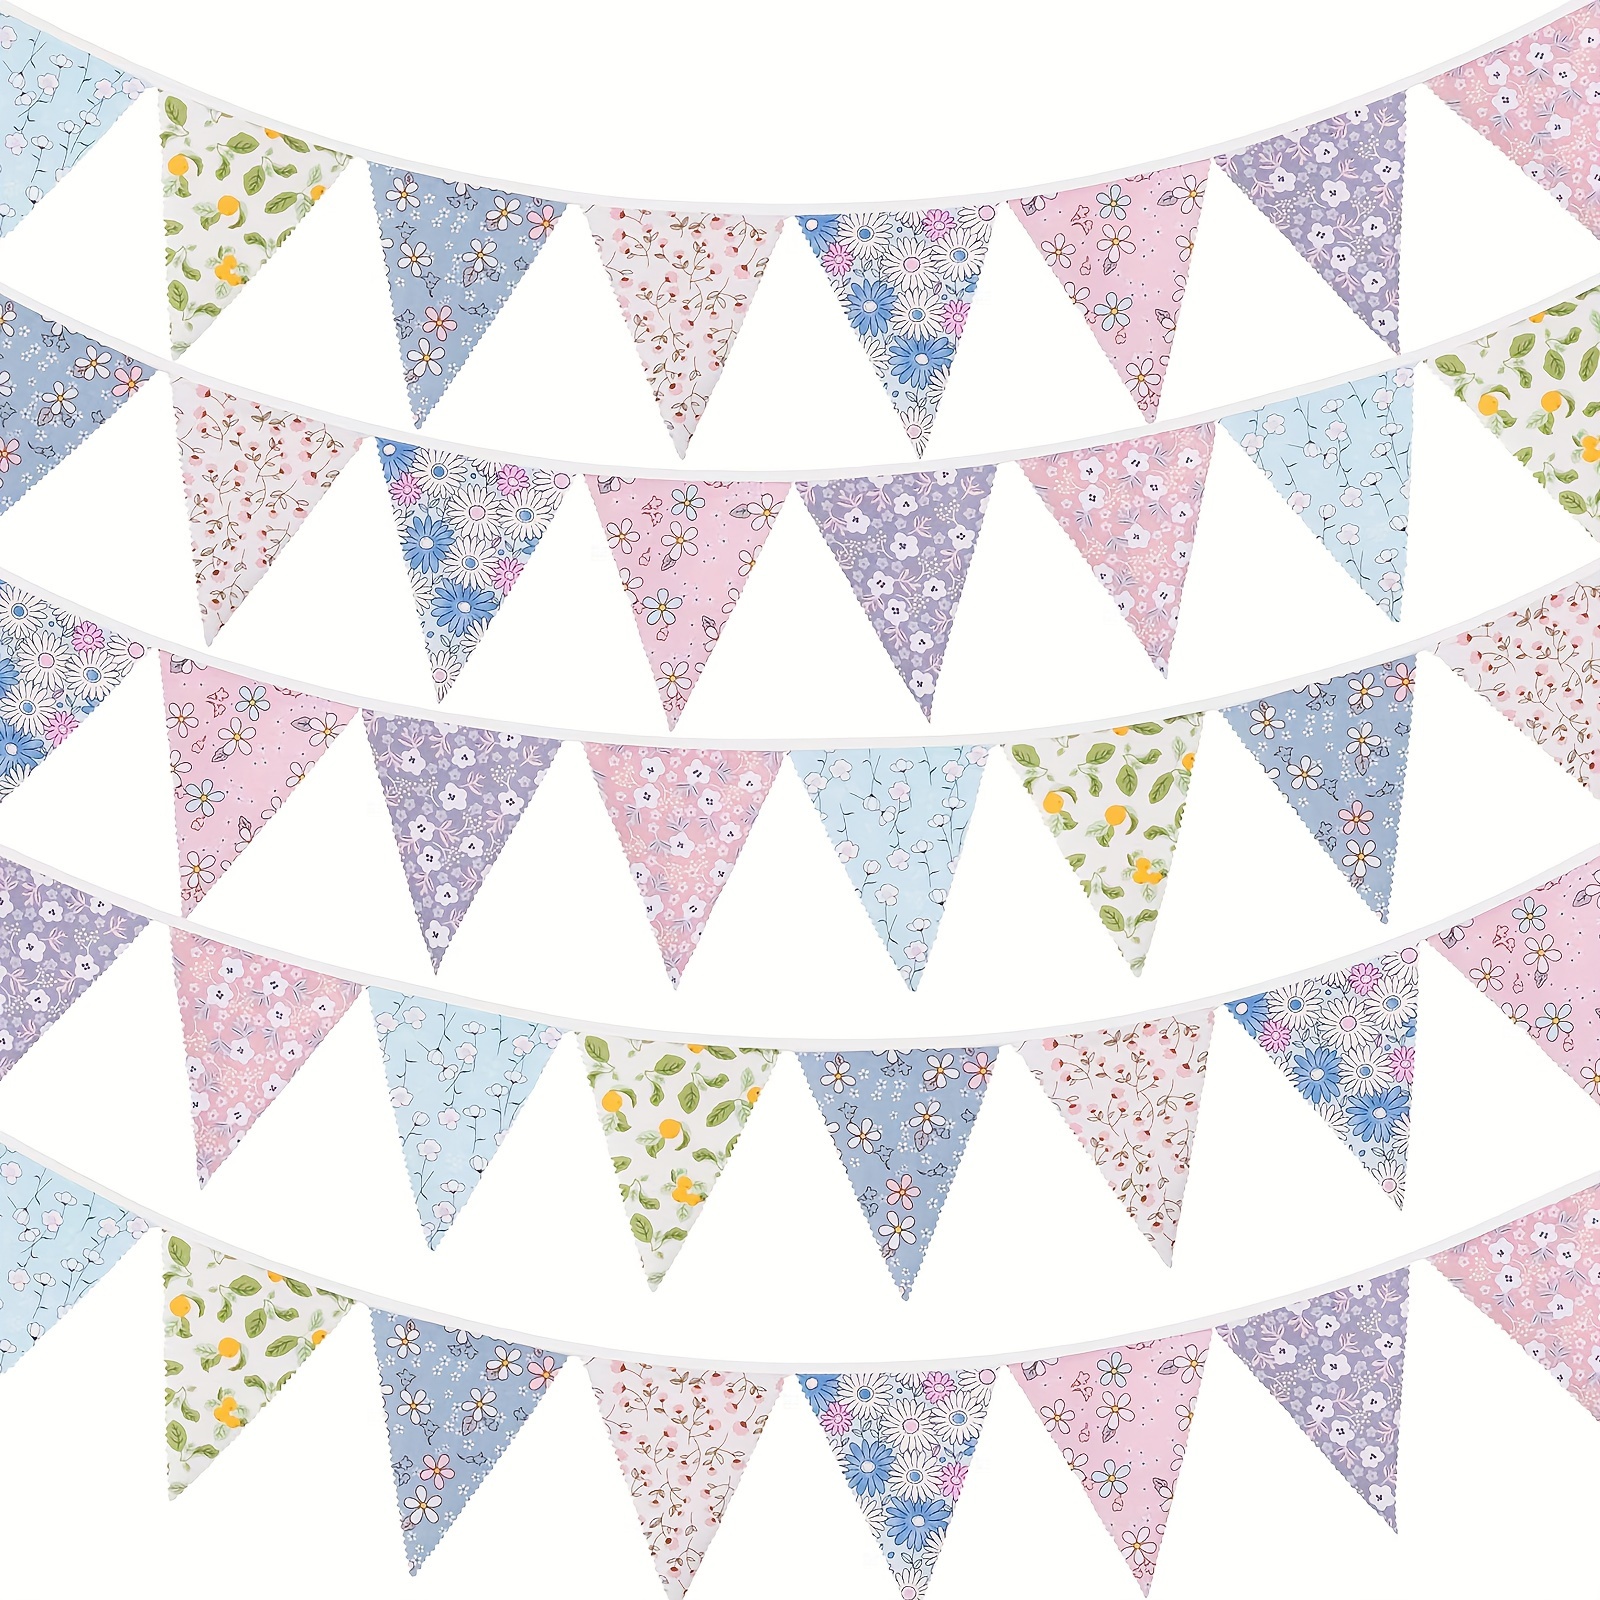 

42pcs/set 40ft Fabric Bunting Banner Light Color Floral Vintage Bunting Flags Reusable Cotton Triangle Flag Garland Decoration With Xpennants For Garden Wedding Baby Shower Birthday Parties